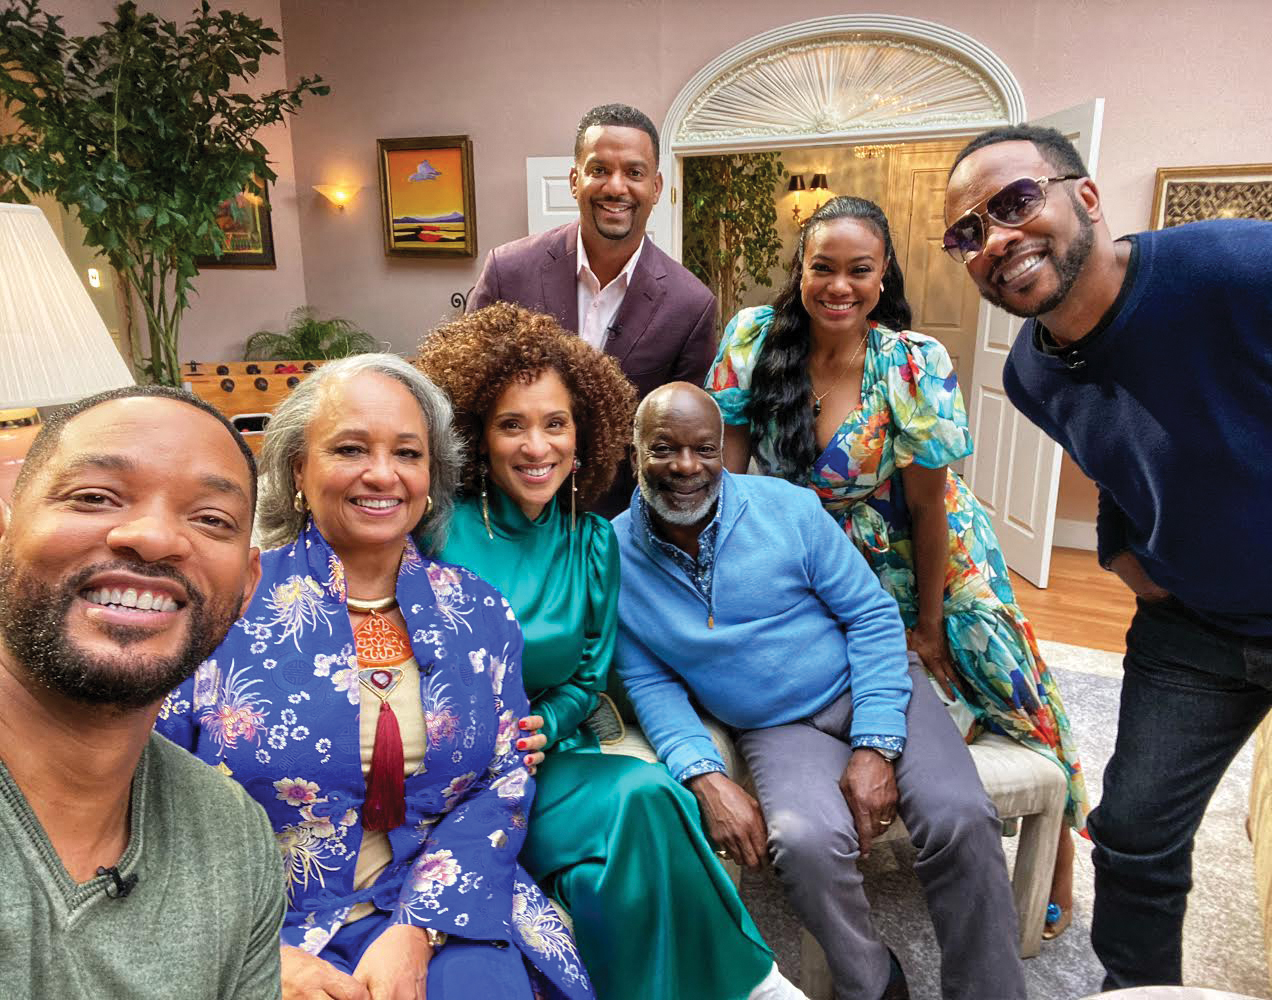 Daphne Maxwell Reid rejoins cast for ‘The Fresh Prince of BelAir